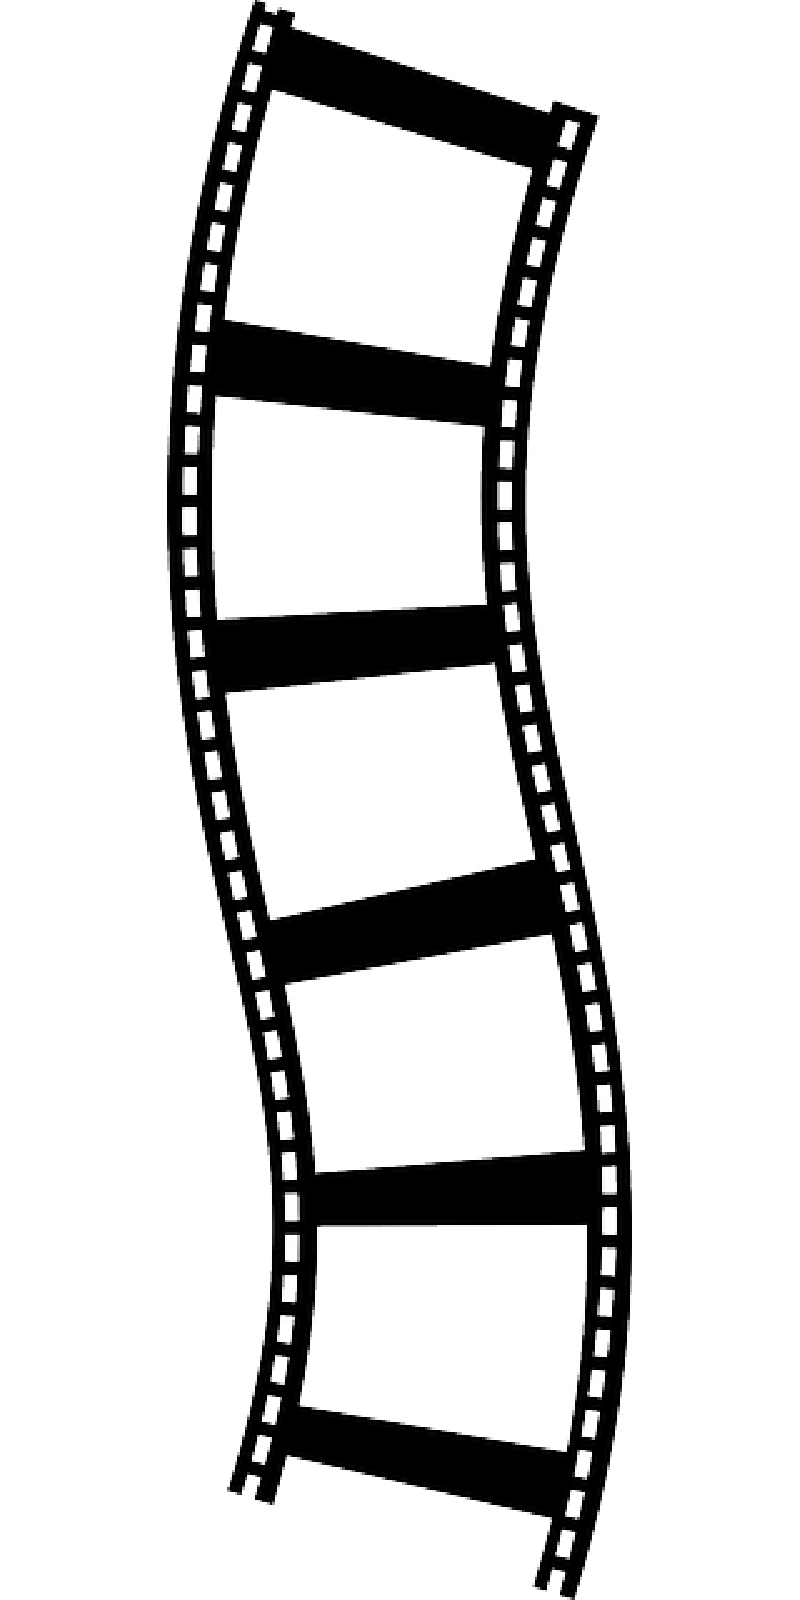 Movie reel showing post clipart